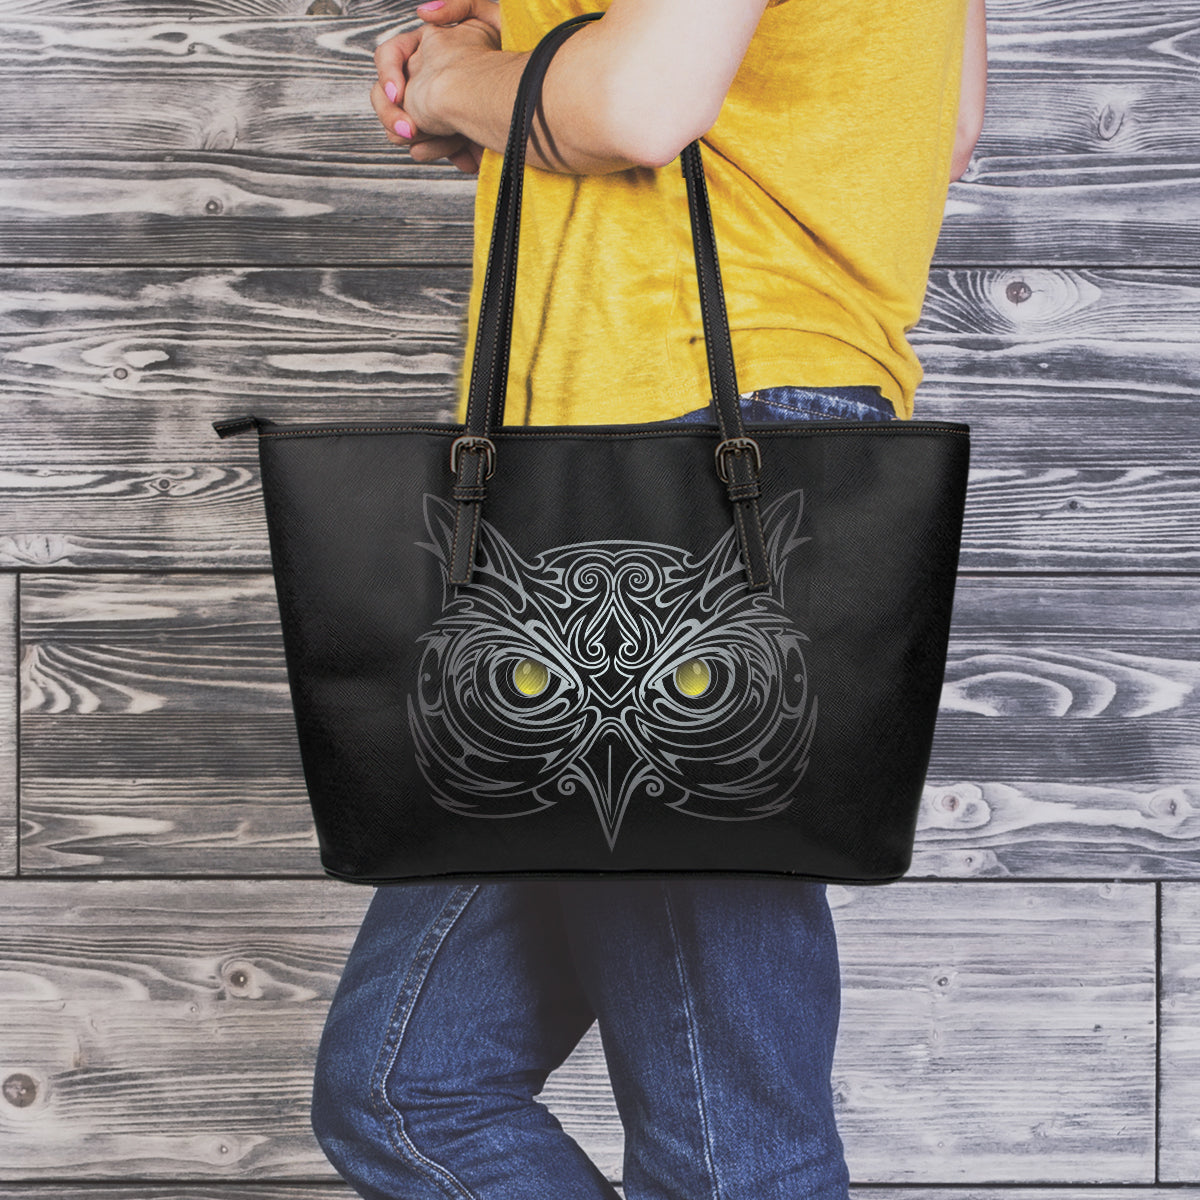 Black Owl Small Leather Tote Bag